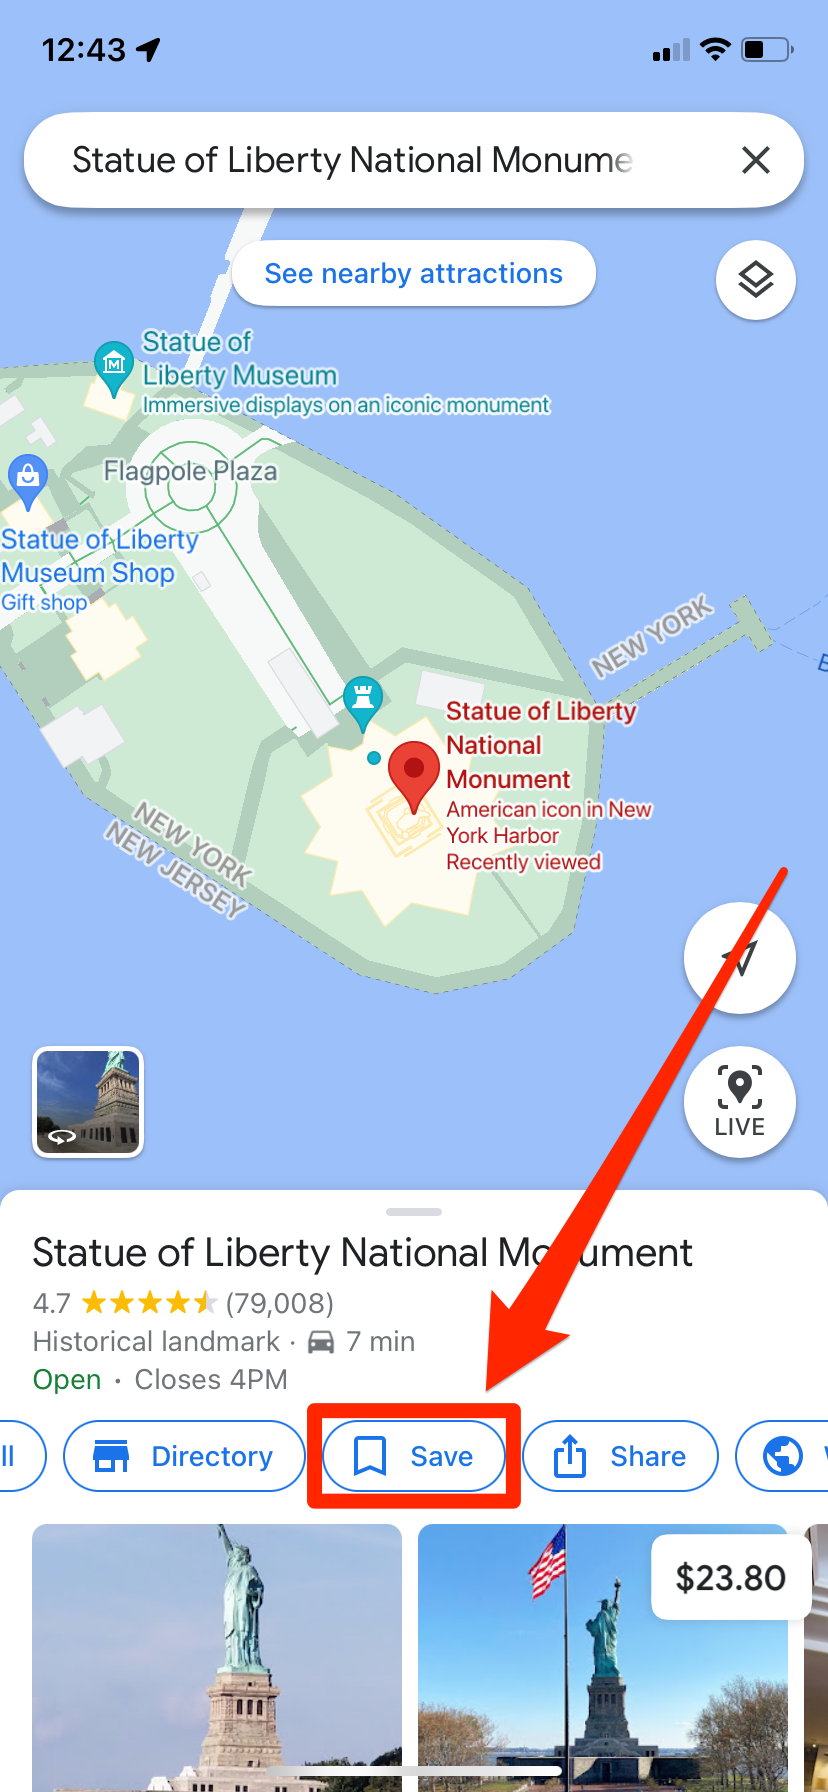 A Google Maps screenshot, showing the info page for the Statue of Liberty. The "Save" option is highlighted.